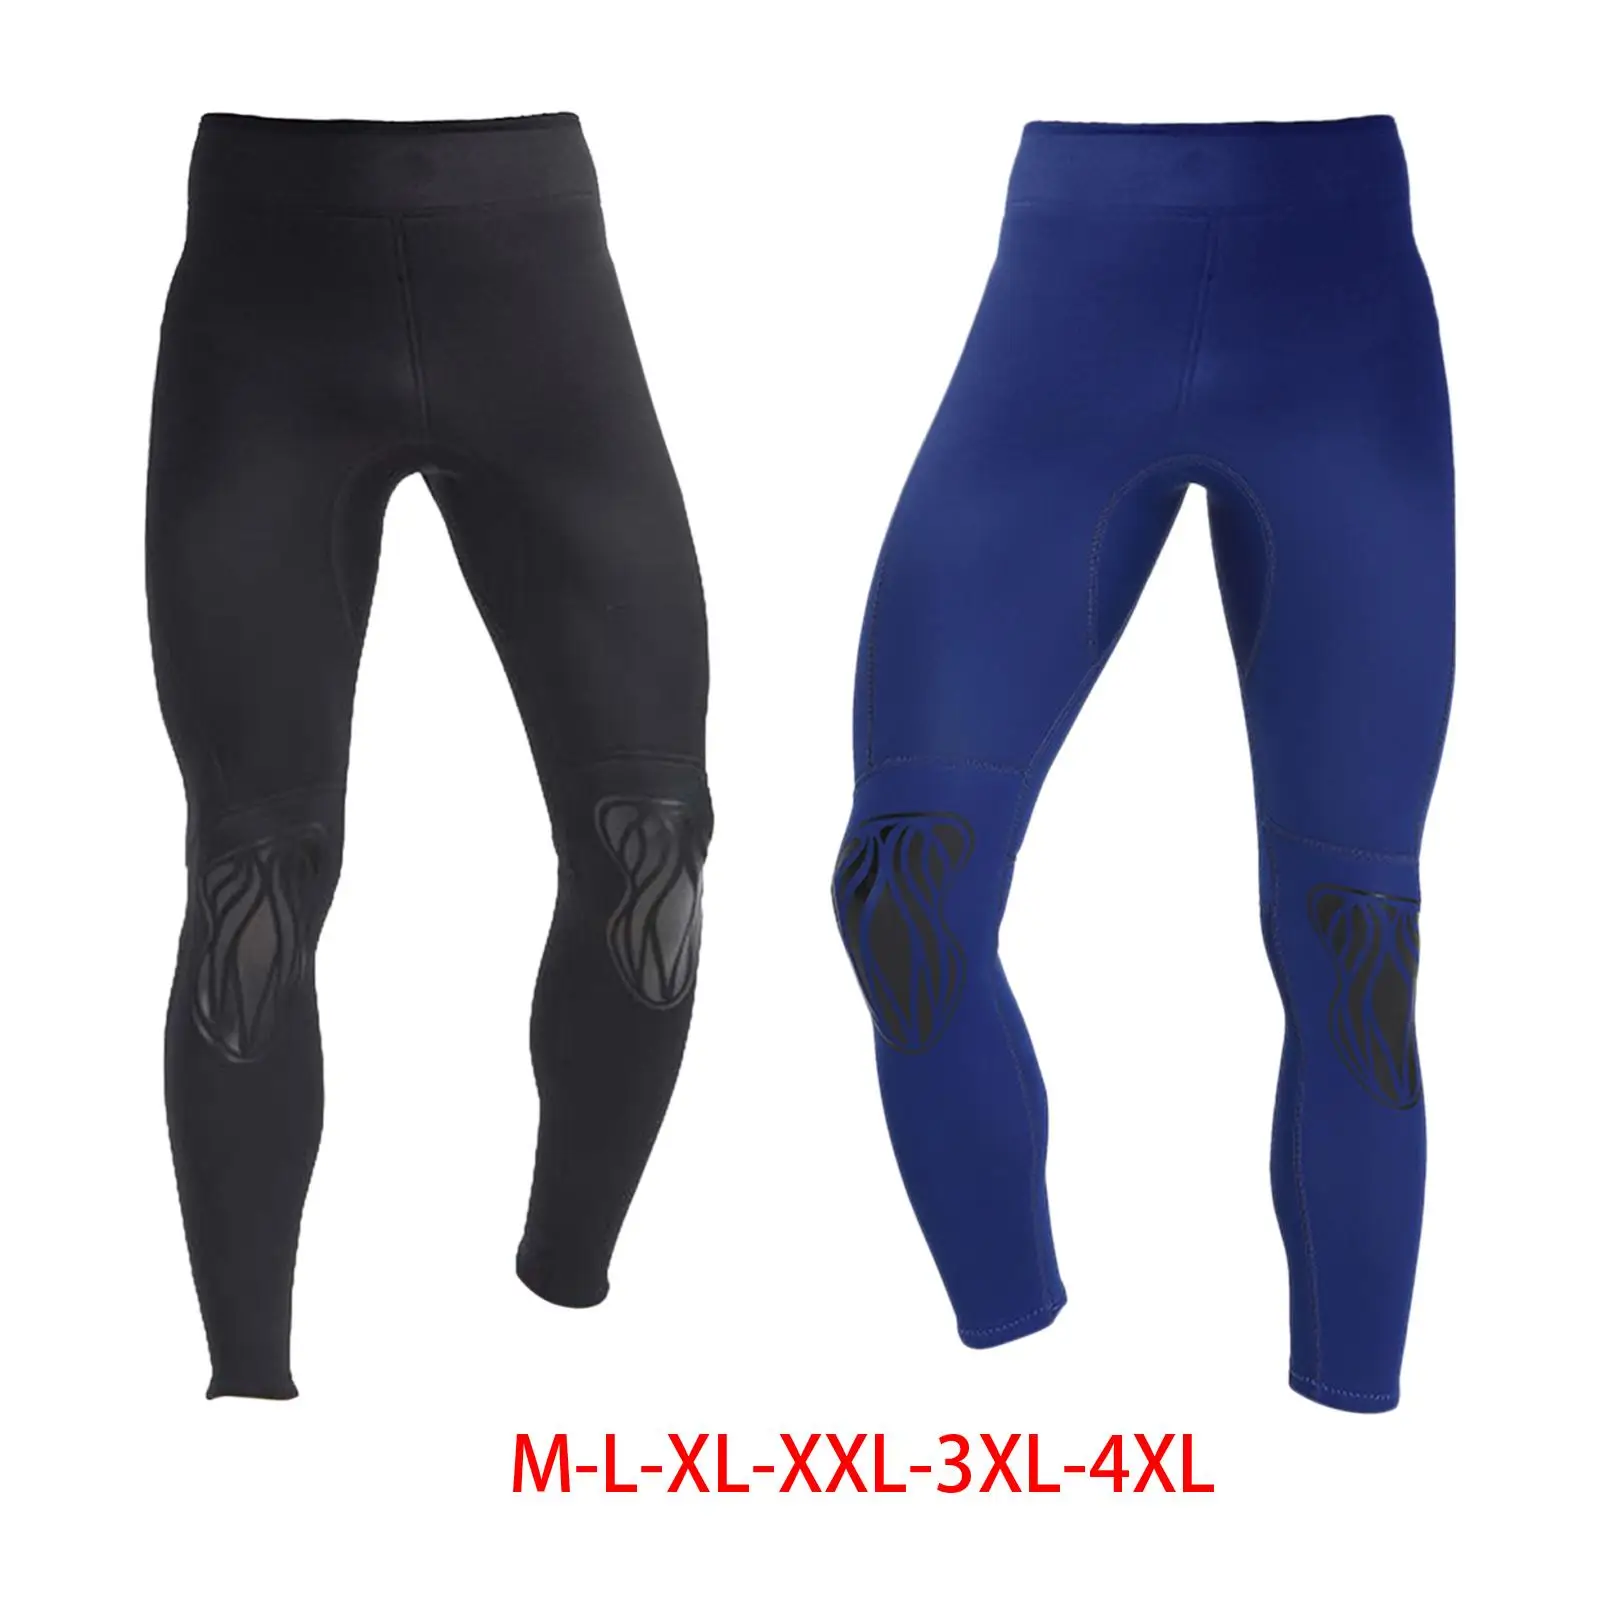 Adults Wetsuits Pants 3mm Neoprene Tight High Waist Trousers for Snorkeling